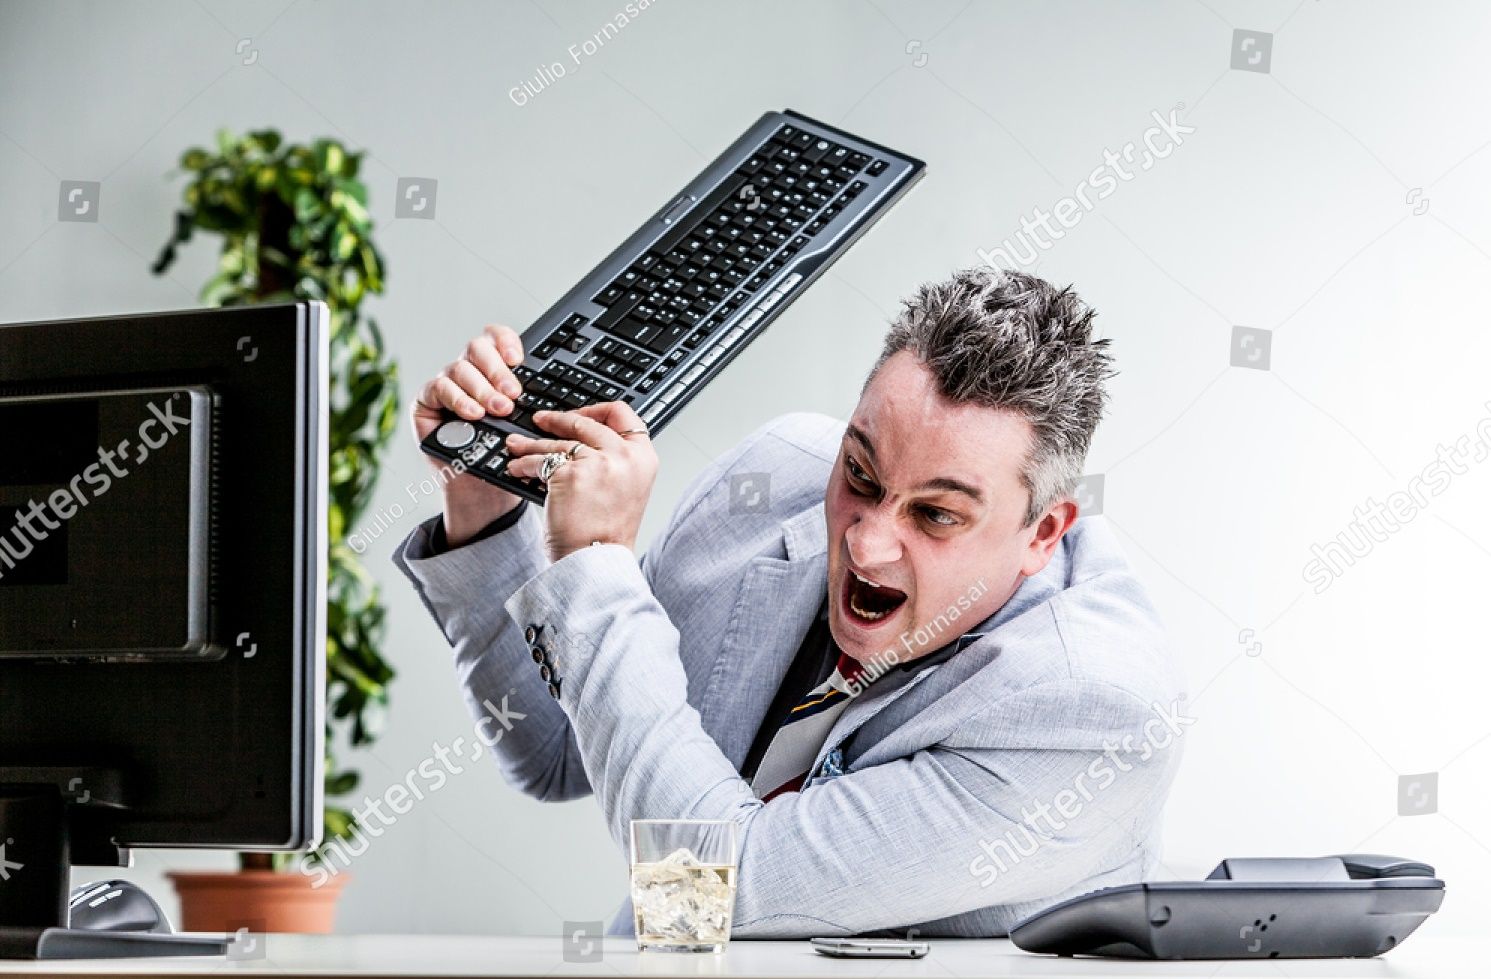 stock-photo-office-worker-destroying-his-computer-by-smashing-the-keyboard-over-the-screen-446107957.jpg